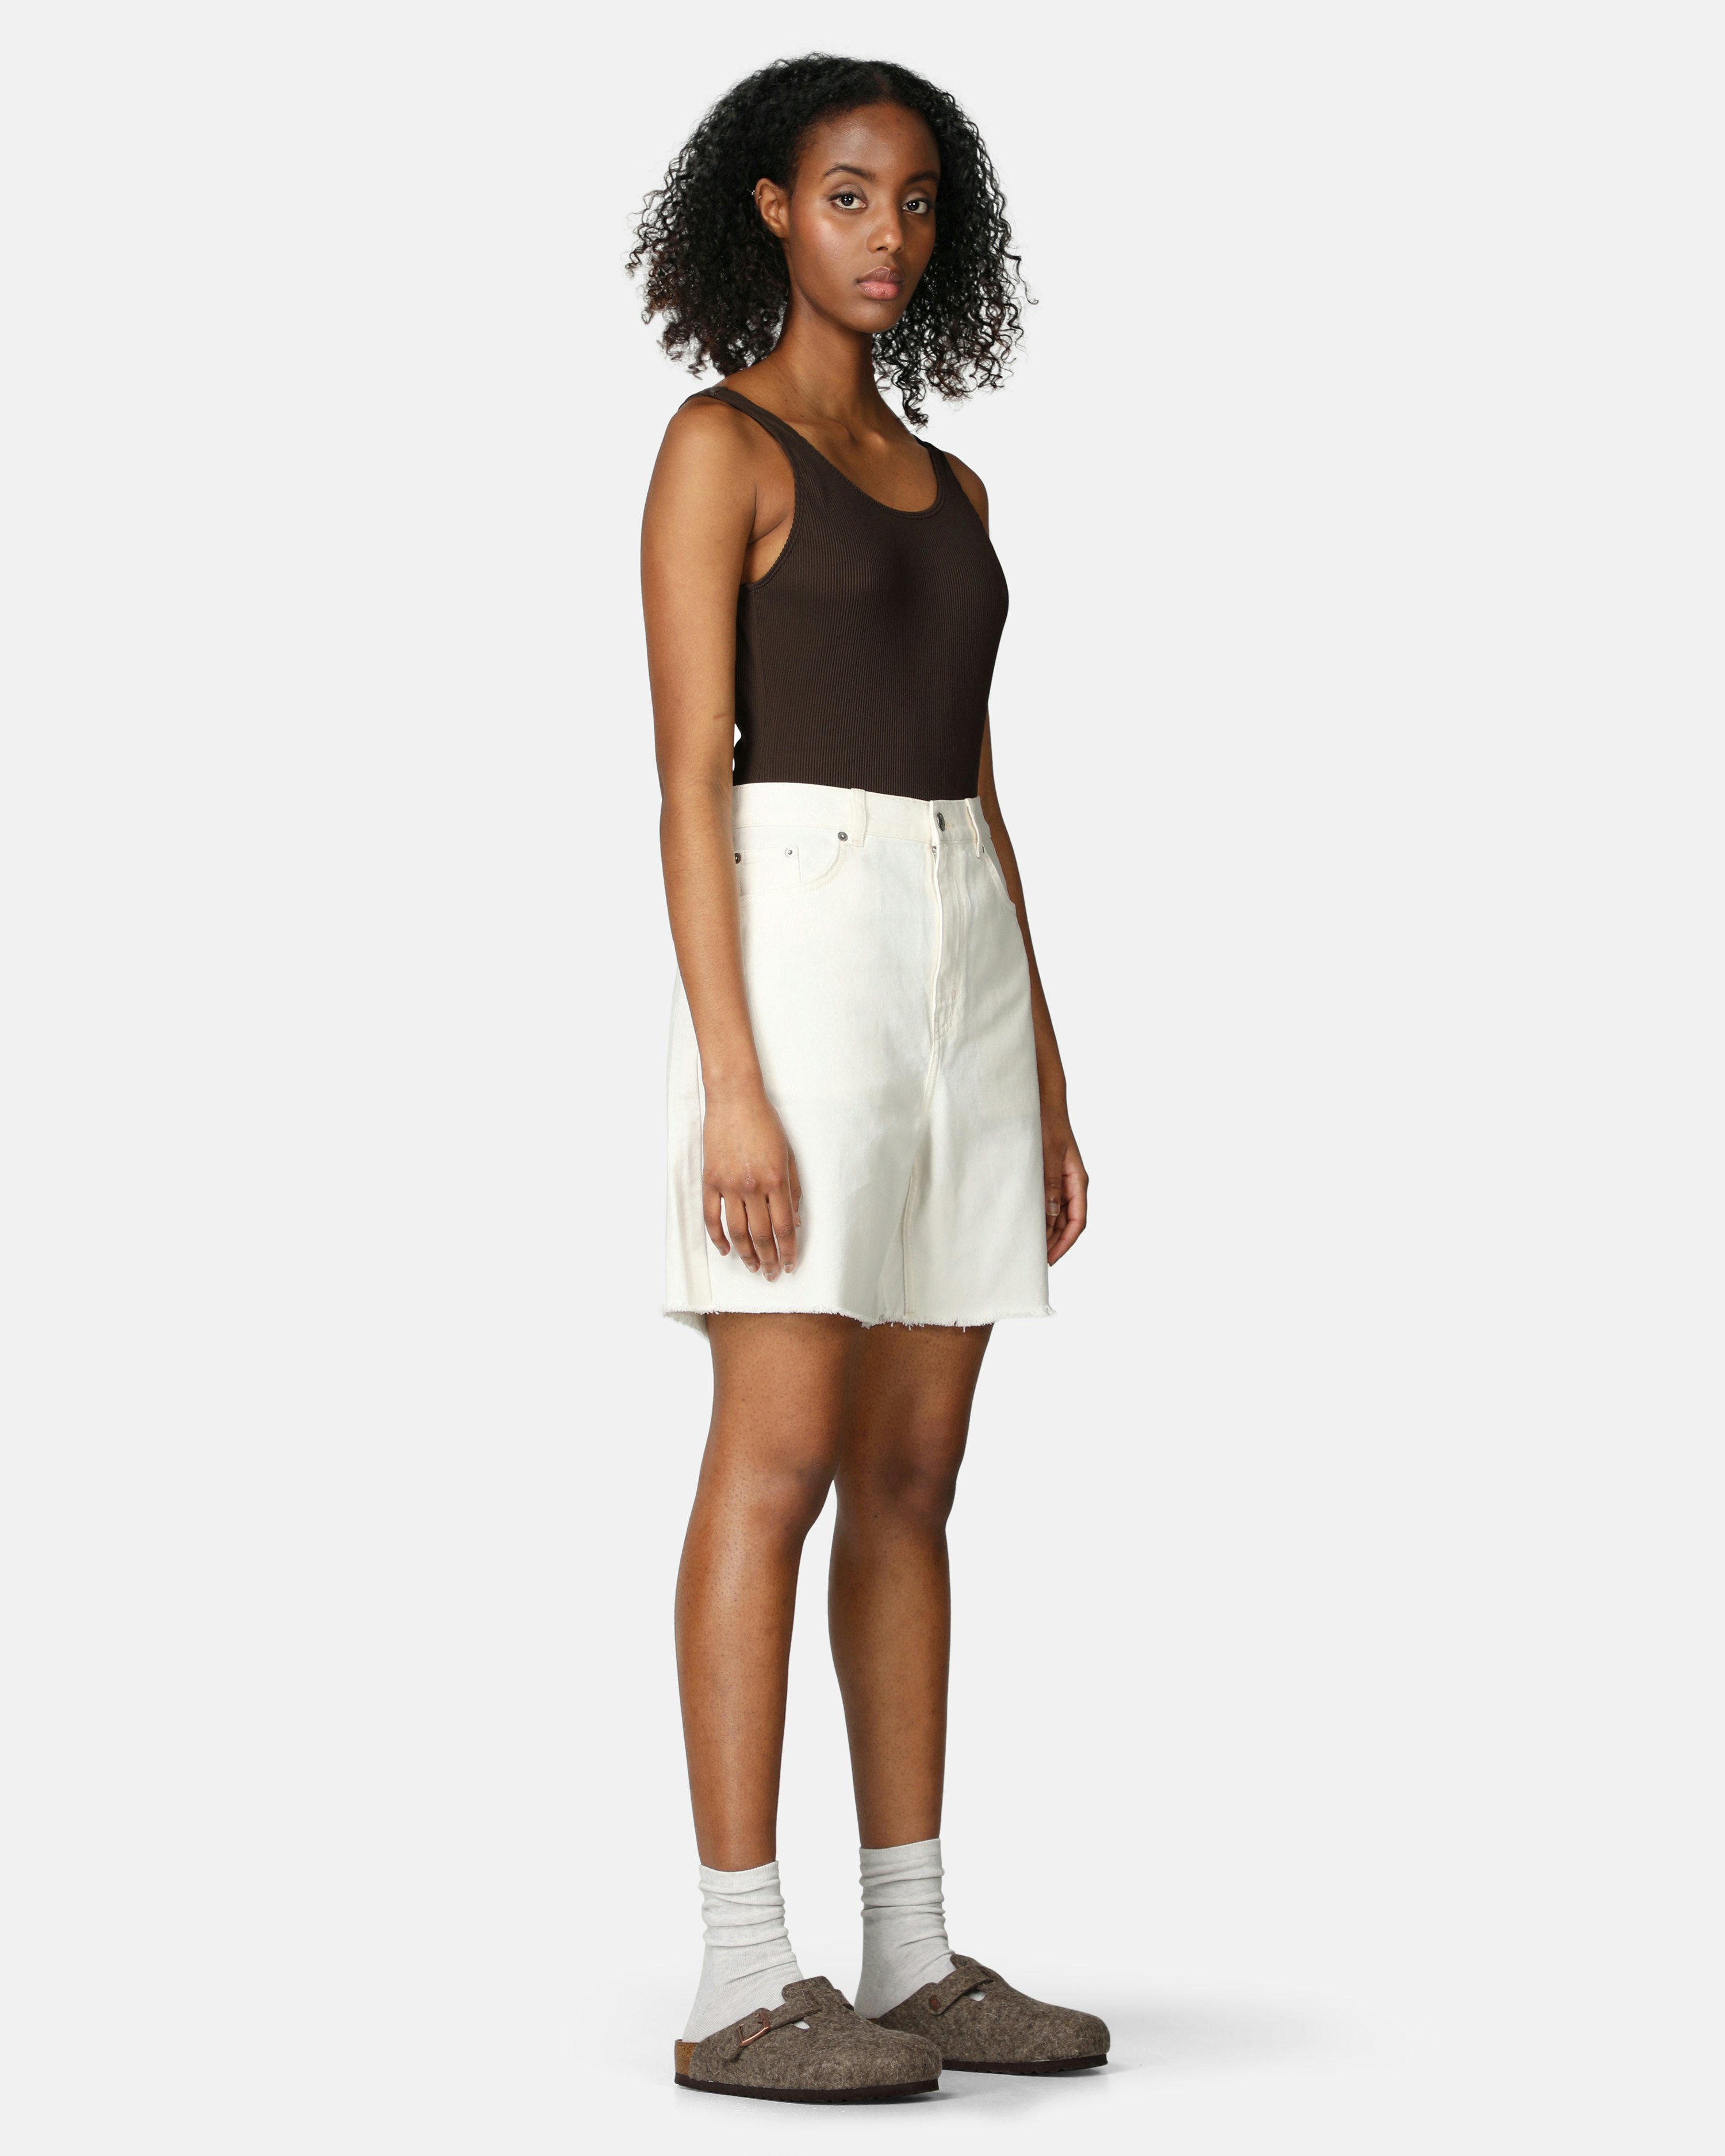 Loose shorts that look like a skirt